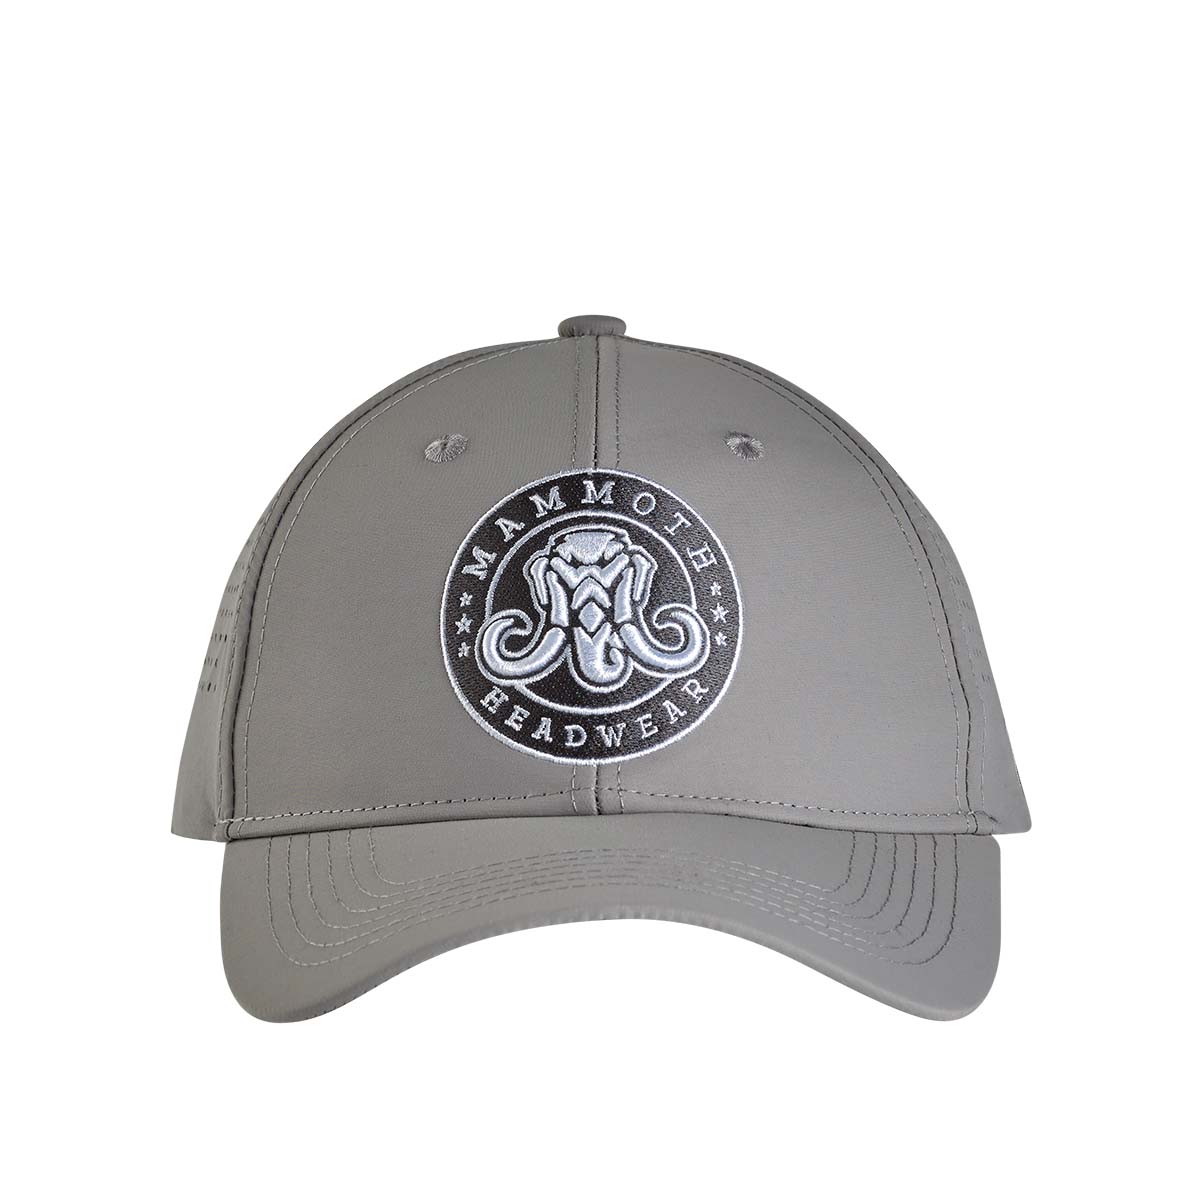  CLASSIC PERFORMANCE SNAPBACK - GREY - Front View